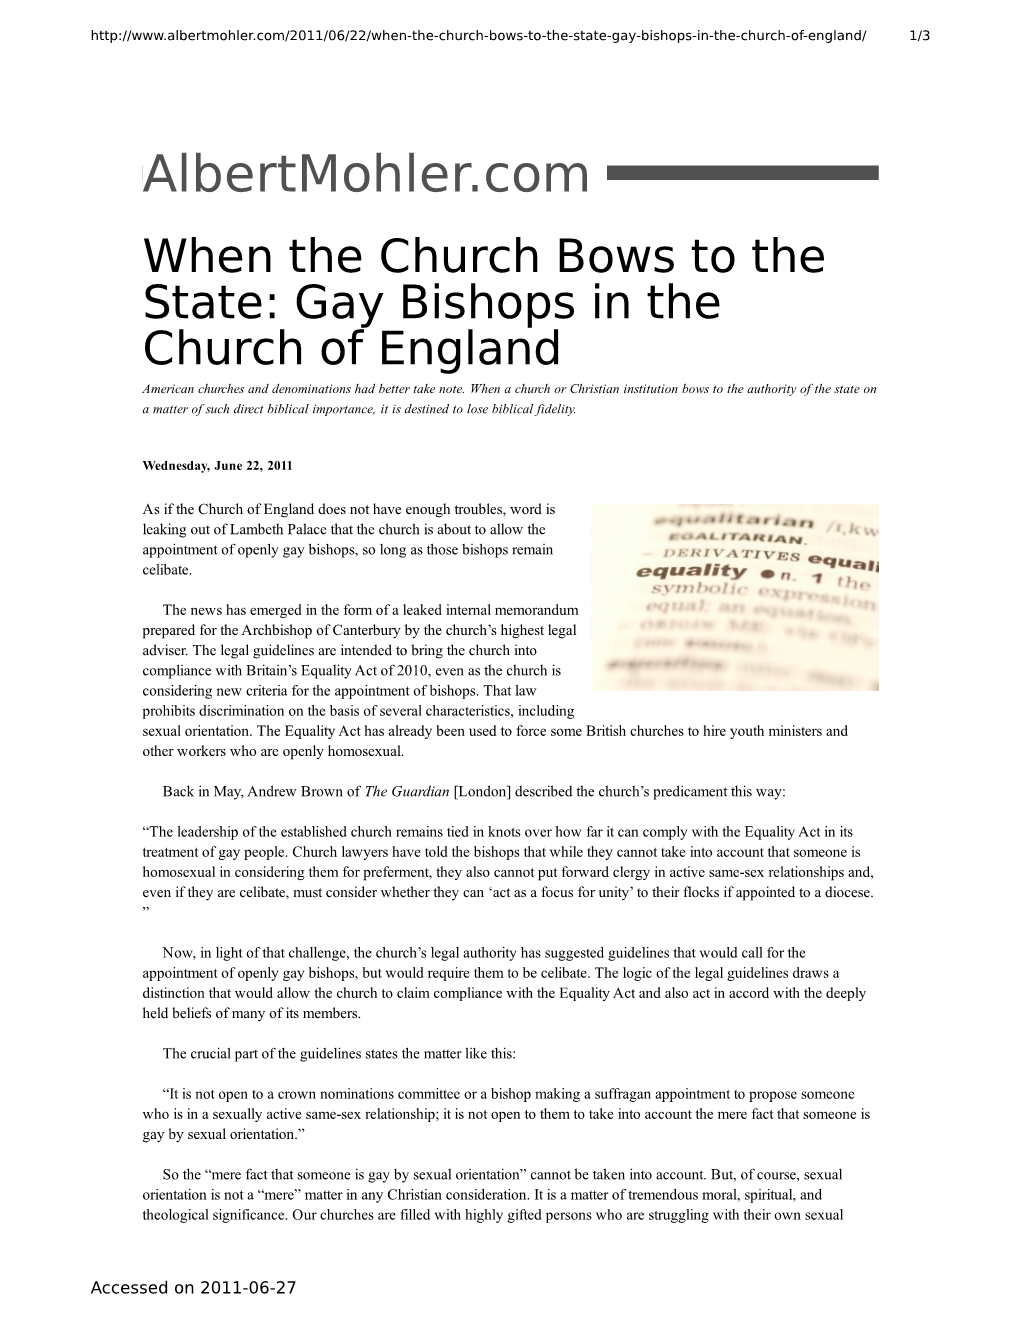 Gay Bishops in the Church of England American Churches and Denominations Had Better Take Note